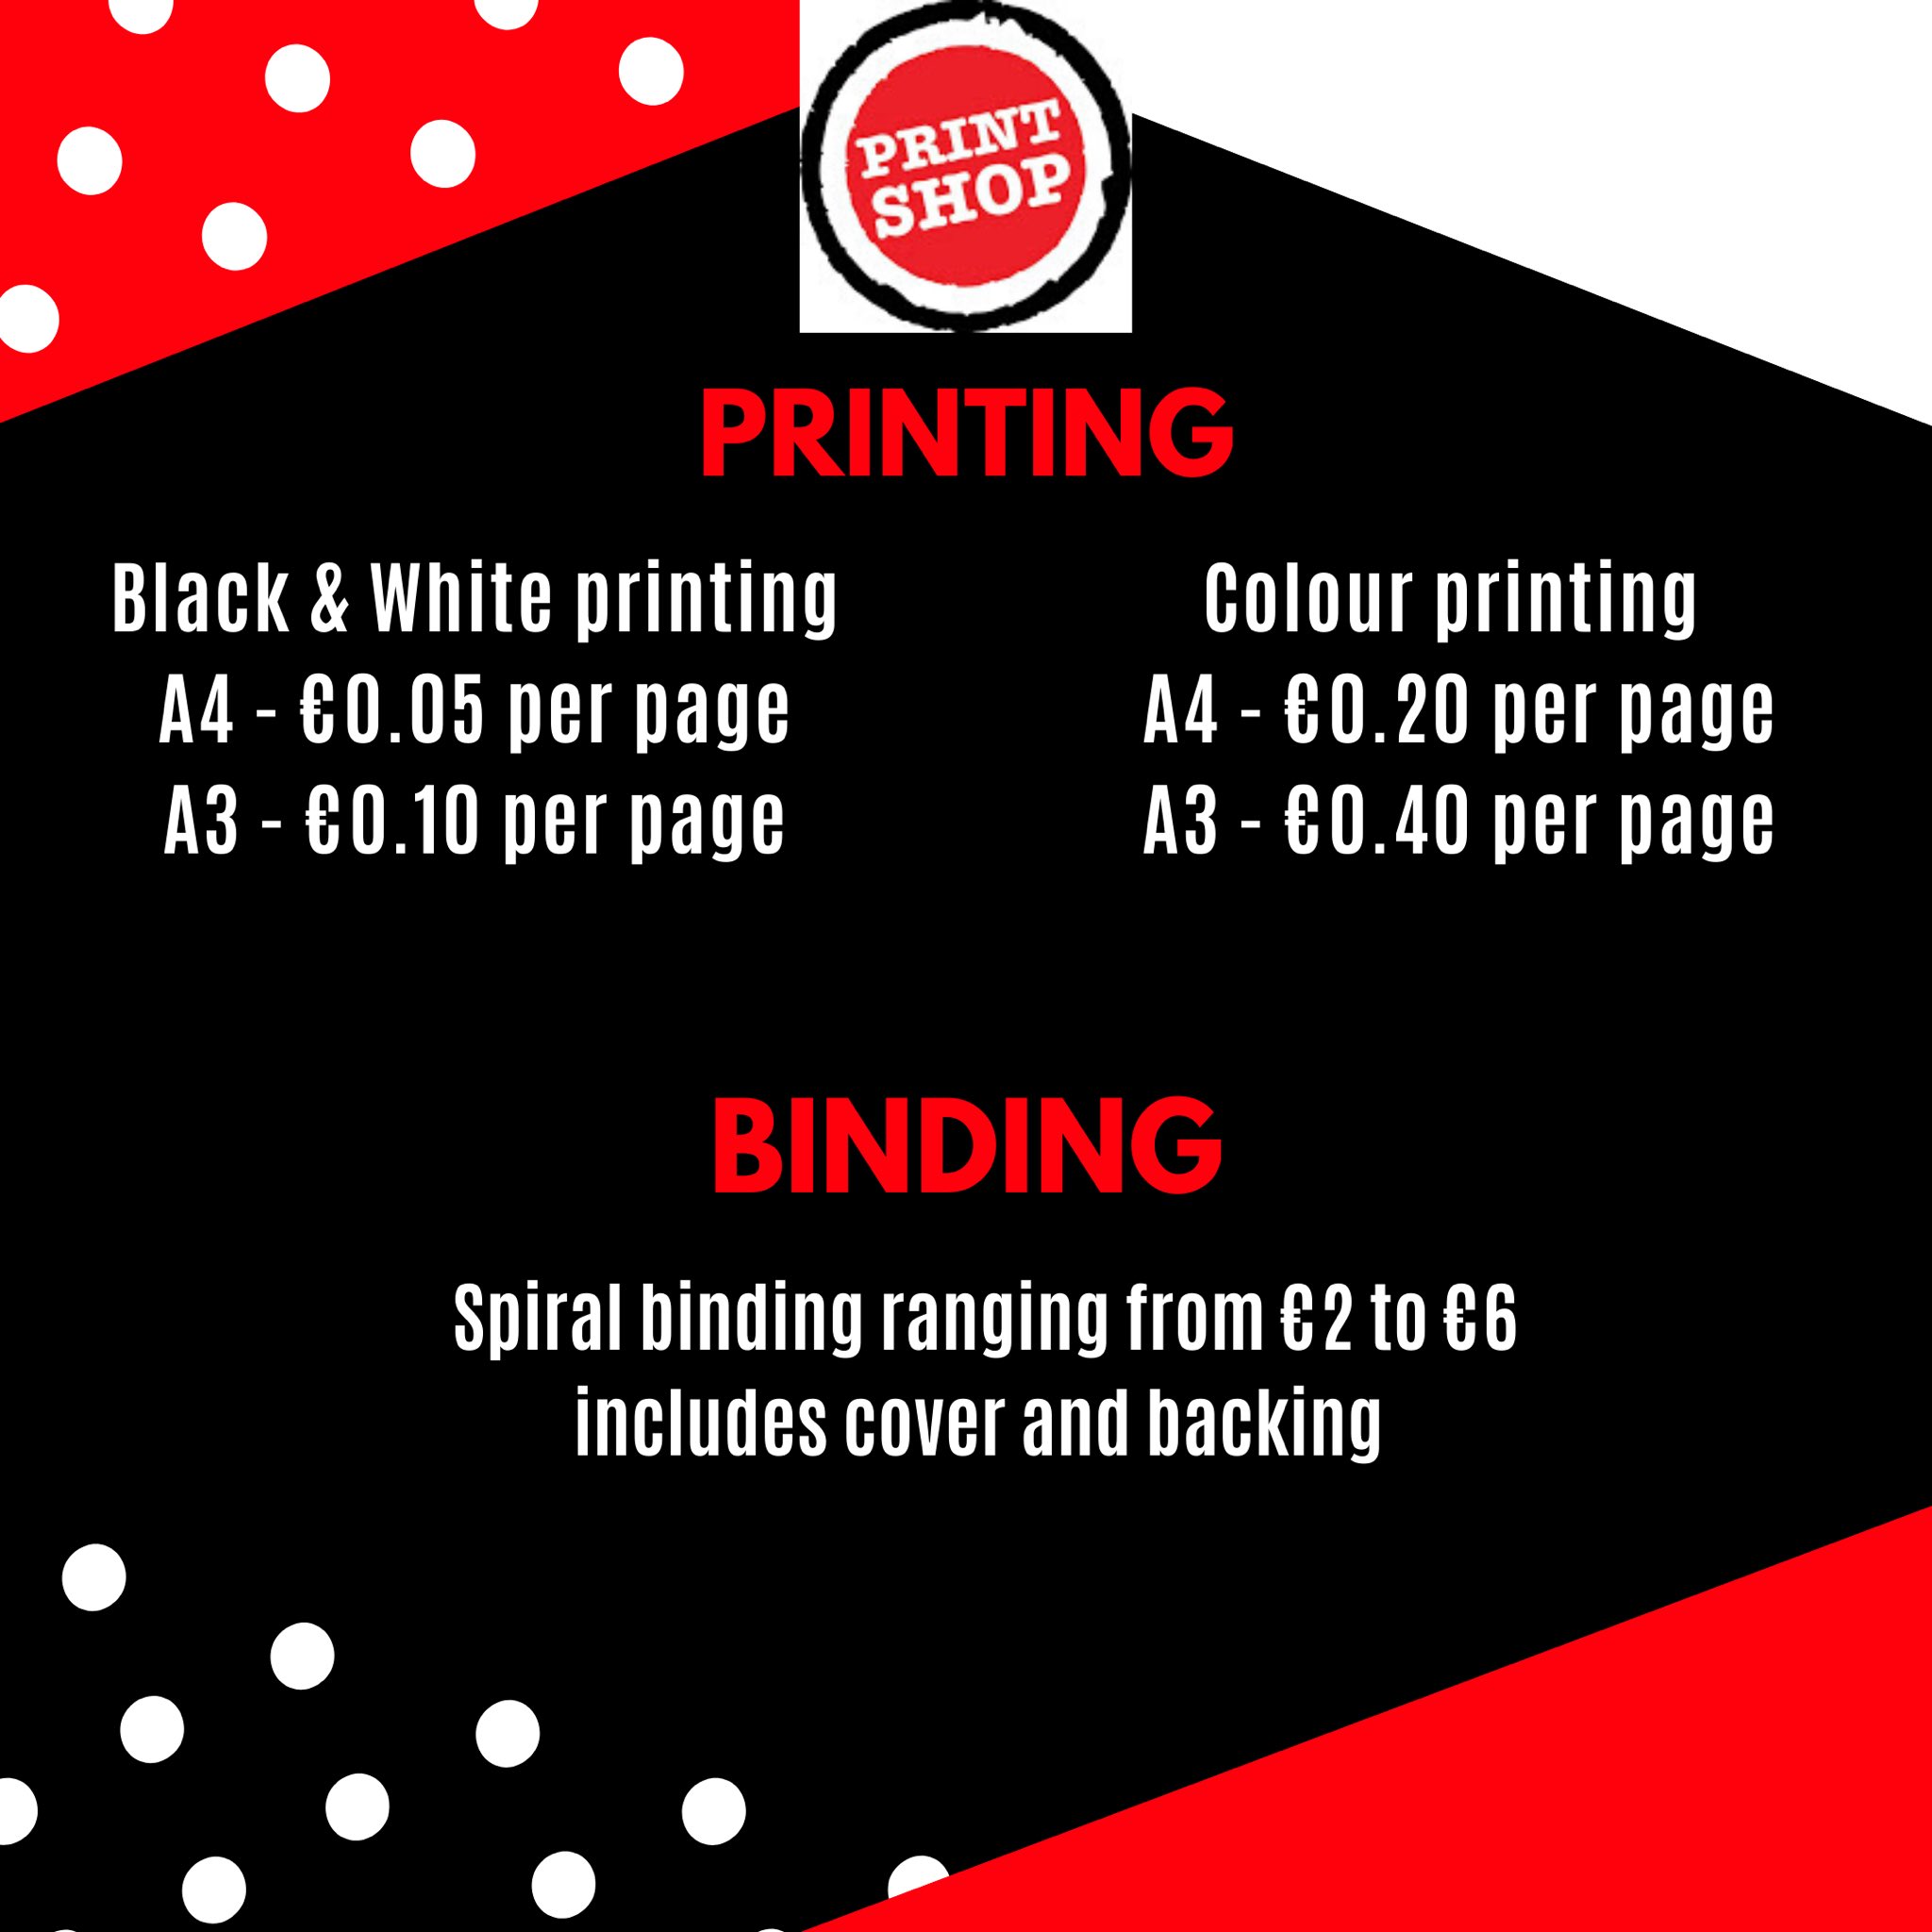 Klimaanlæg Som regel Antagelser, antagelser. Gætte SU Print Shop UCC on Twitter: "Need quick printing on campus? We got you  covered, our staff assisted printing service is cheap and simple to use.  https://t.co/UTXMfv9Klc" / Twitter